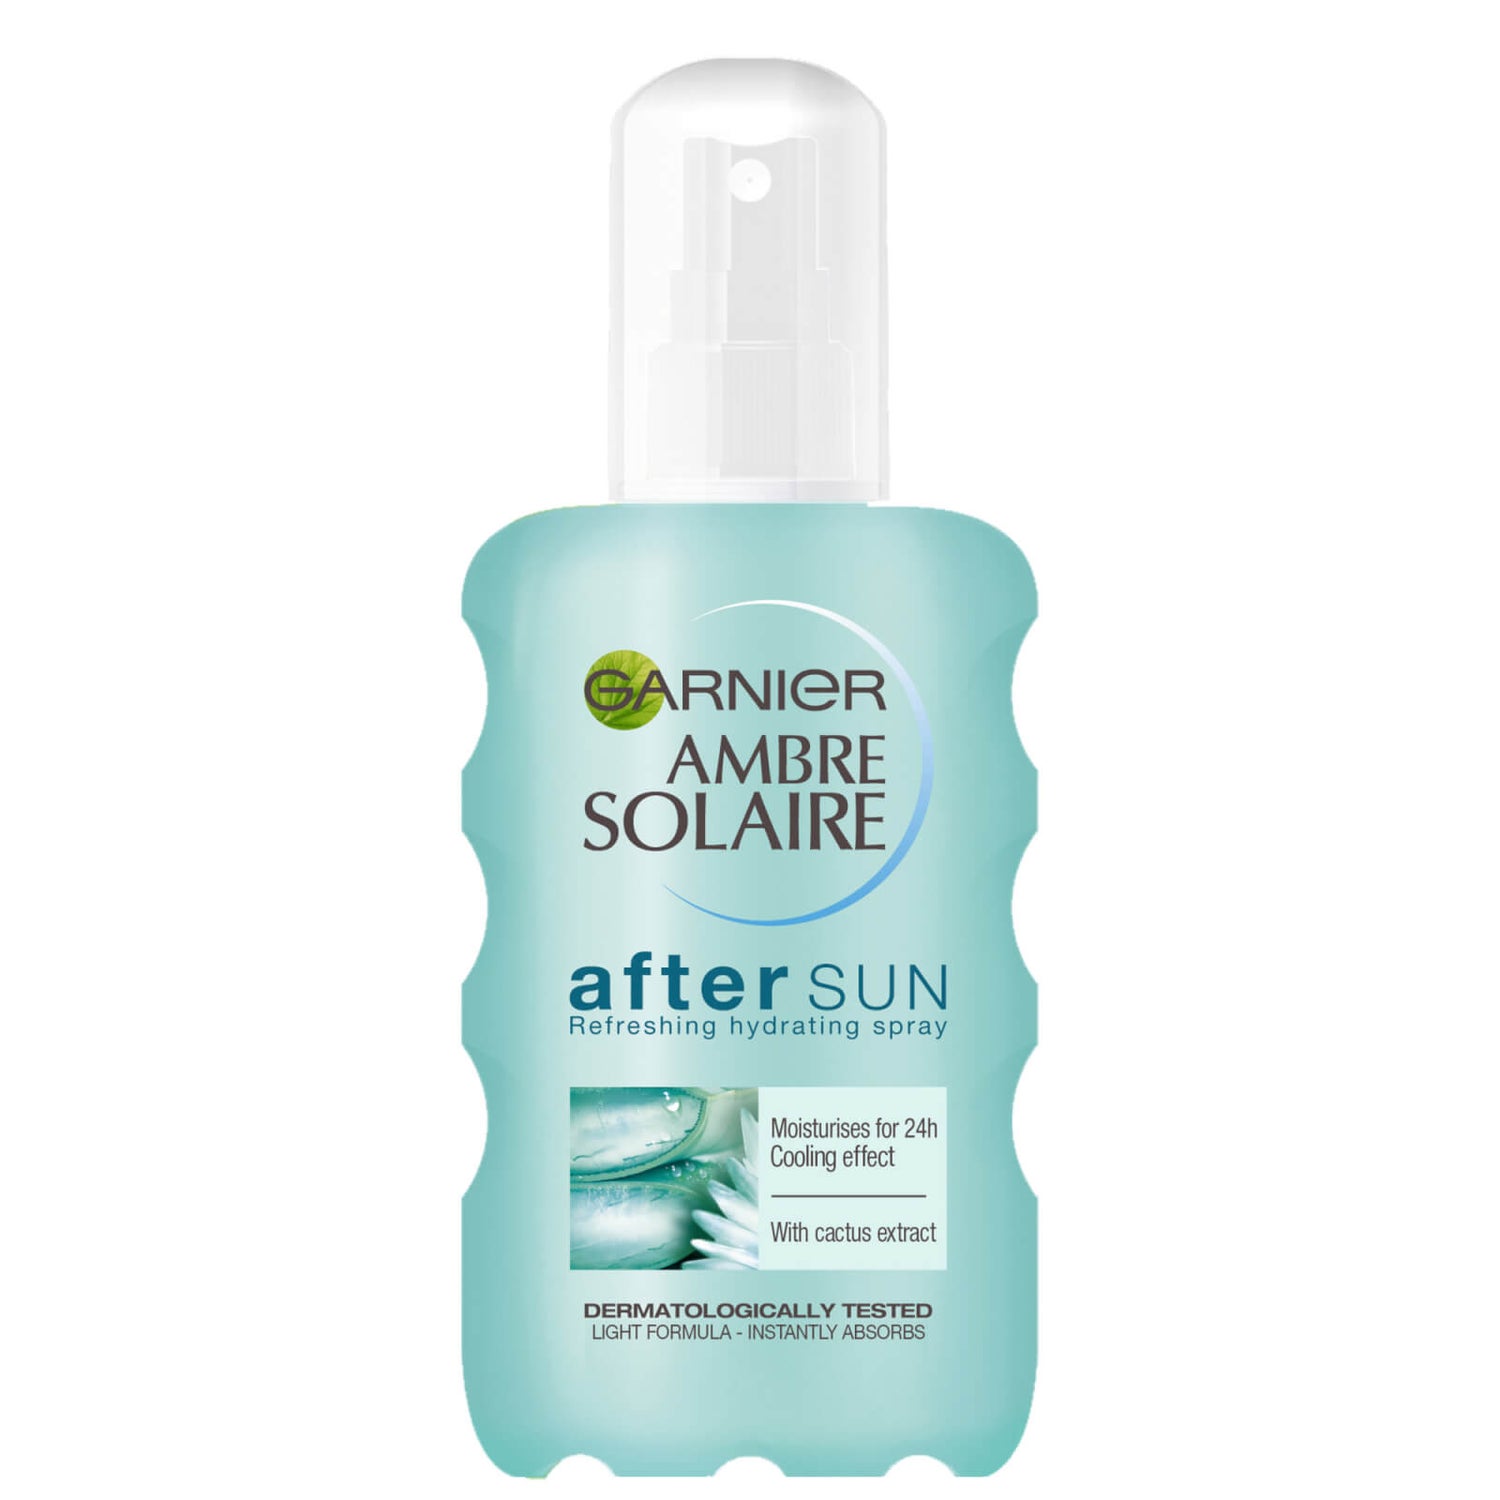 Ambre Solaire Aftersun Spray 200ml